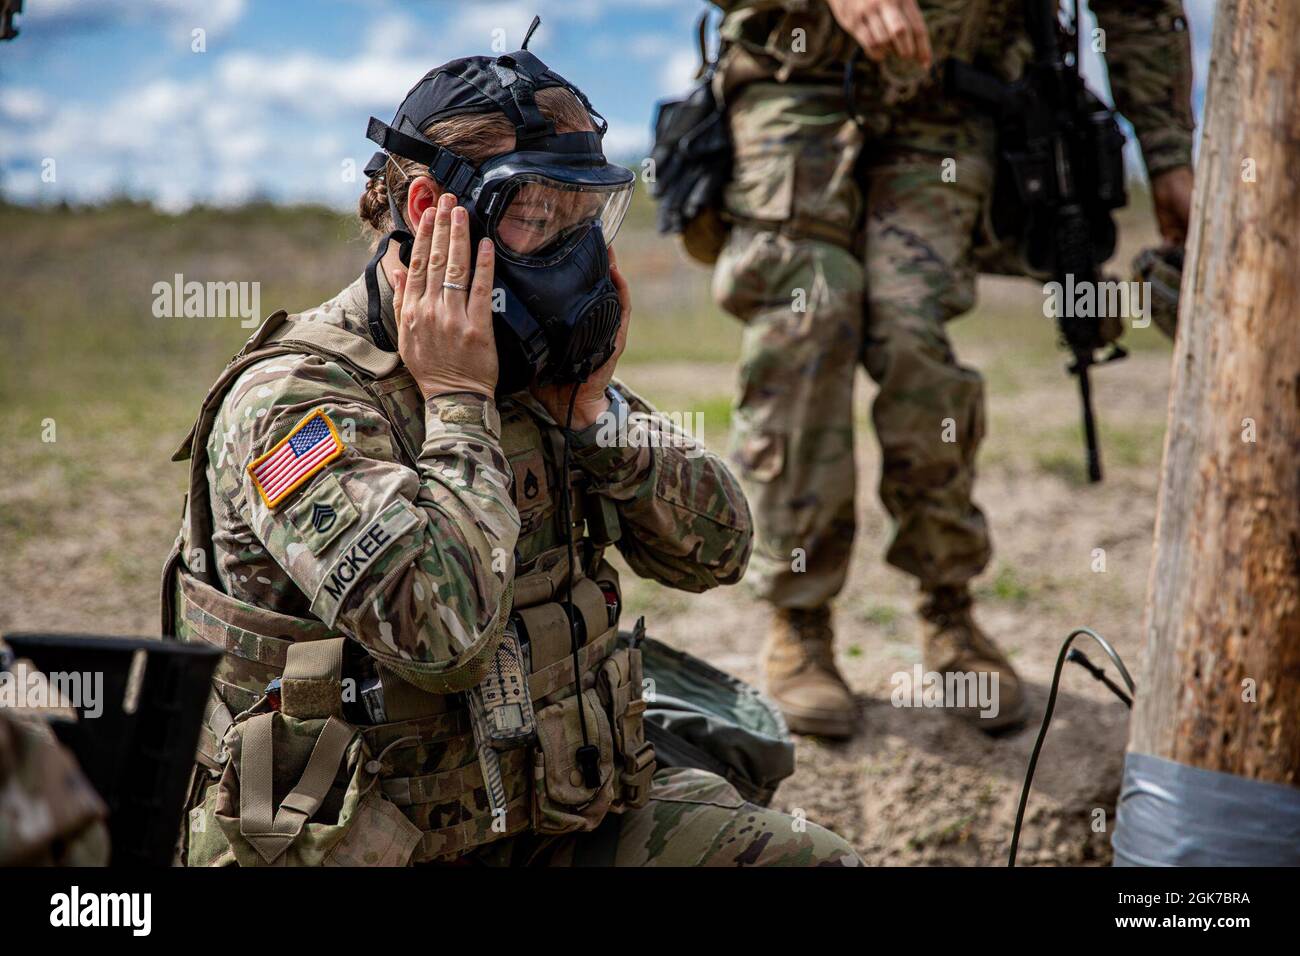 U.S. Army National Guard Staff Sgt. Taryn Mckee with 3rd Battalion, 161st Infantry Regiment, ensures proper seal on her gas mask after a simulated chemical gas attack during demolition range training at Bemowo Piskie Training Area, Poland, August 25, 2021. The demolition training was held to ensure technique and placement of explosives on objects for successful countermobility of the enemy. Training consisted of simulations of real-life scenarios and instruction. Stock Photo